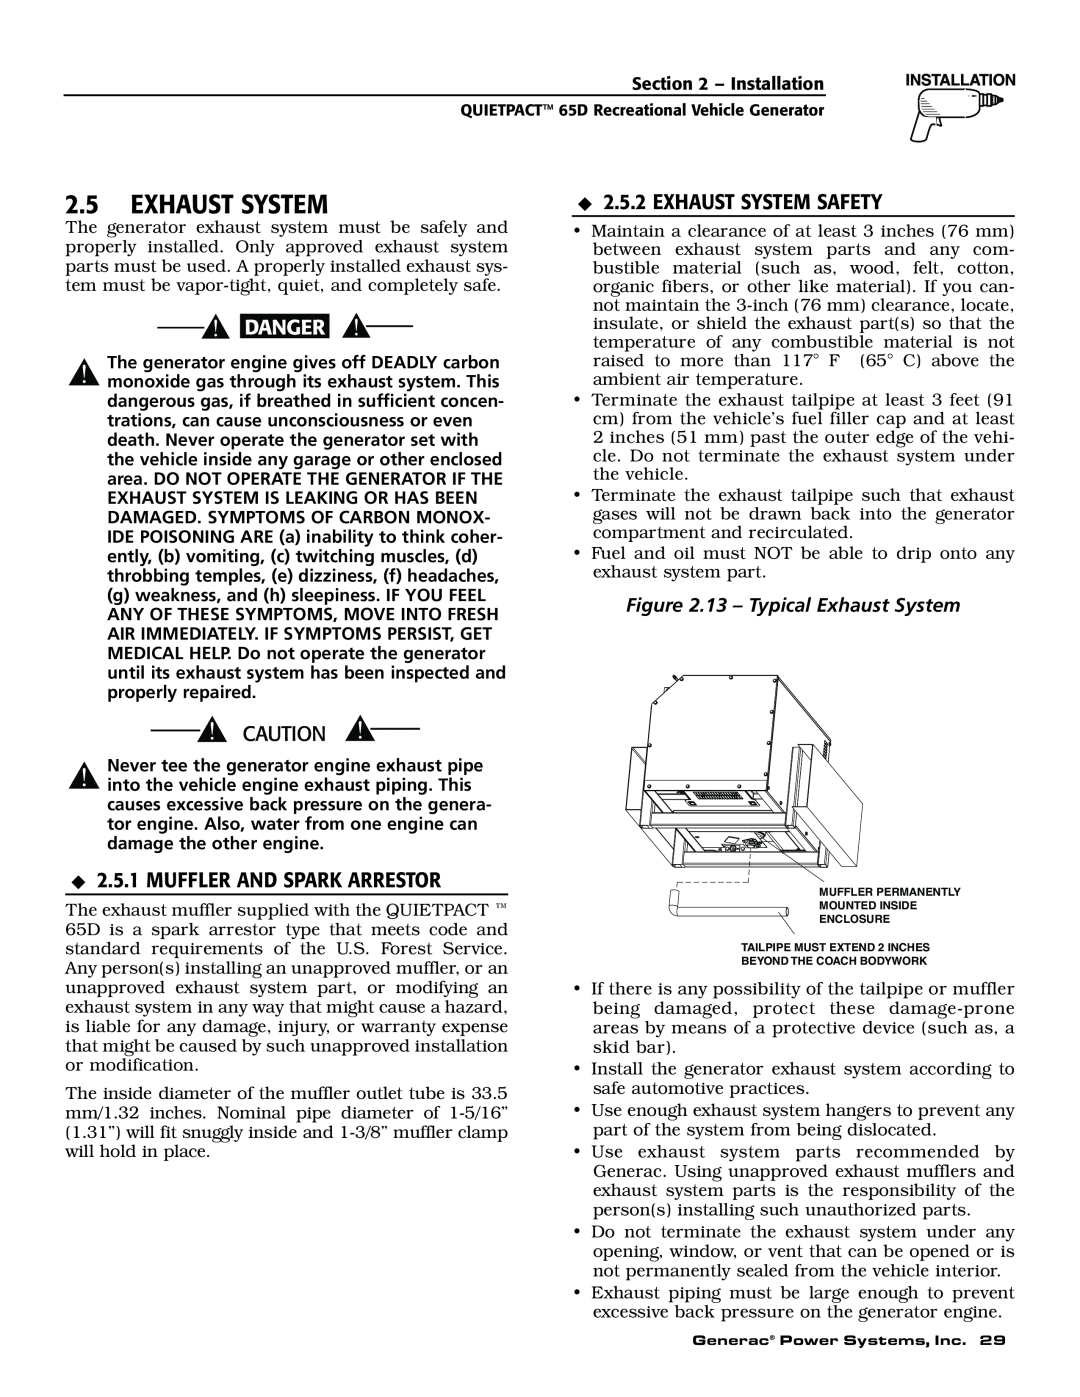 Generac 004614-1 owner manual Exhaust System Safety, Muffler And Spark Arrestor, 13 - Typical Exhaust System 